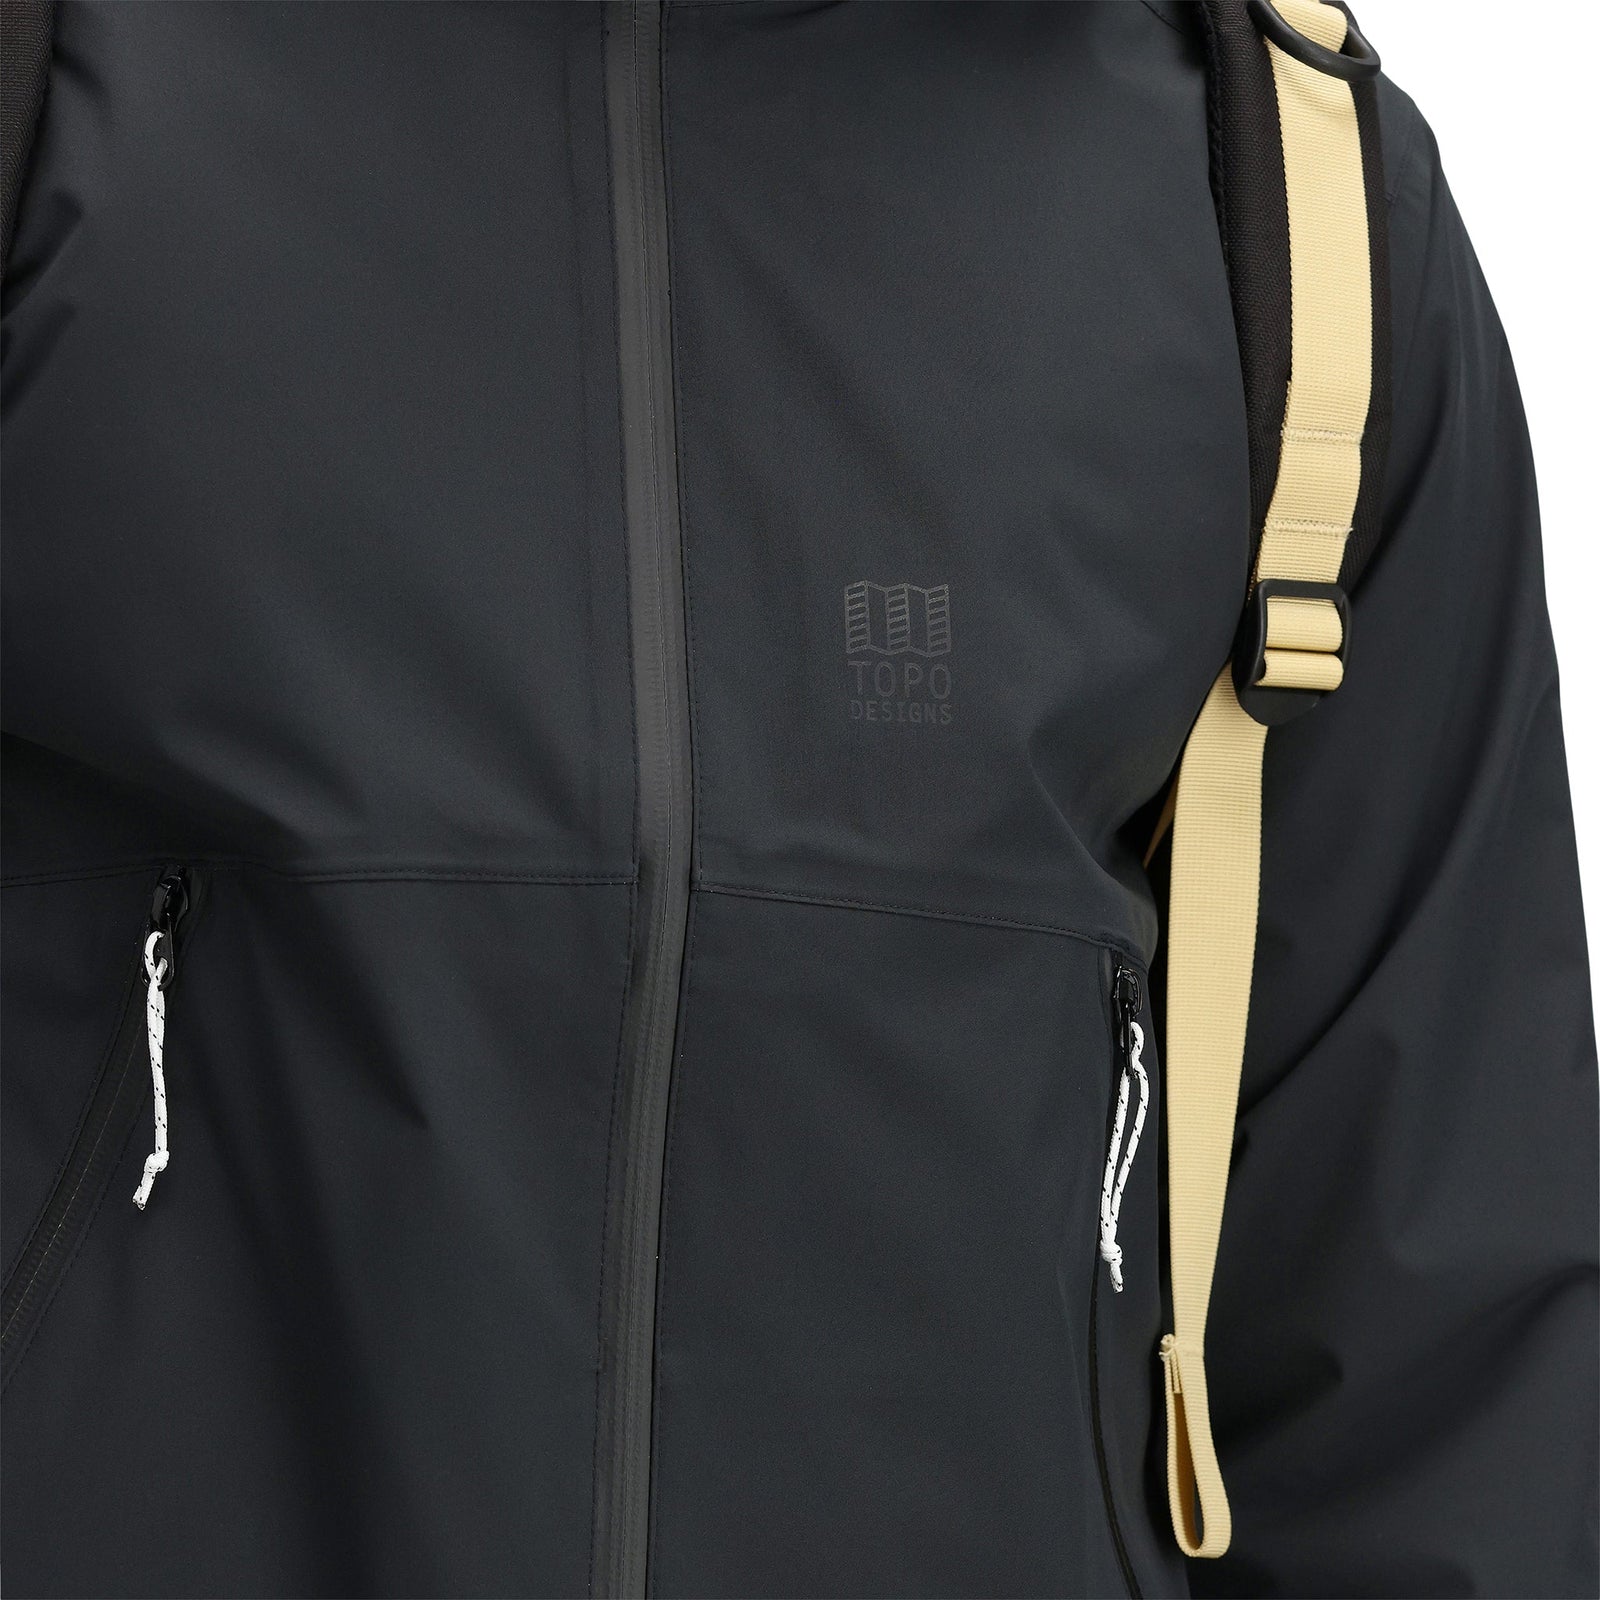 General detail shot of chest logo and zipper pulls on model wearing Topo Designs Men's Global Jacket packable 10k waterproof rain shell in recycled "black" polyester.